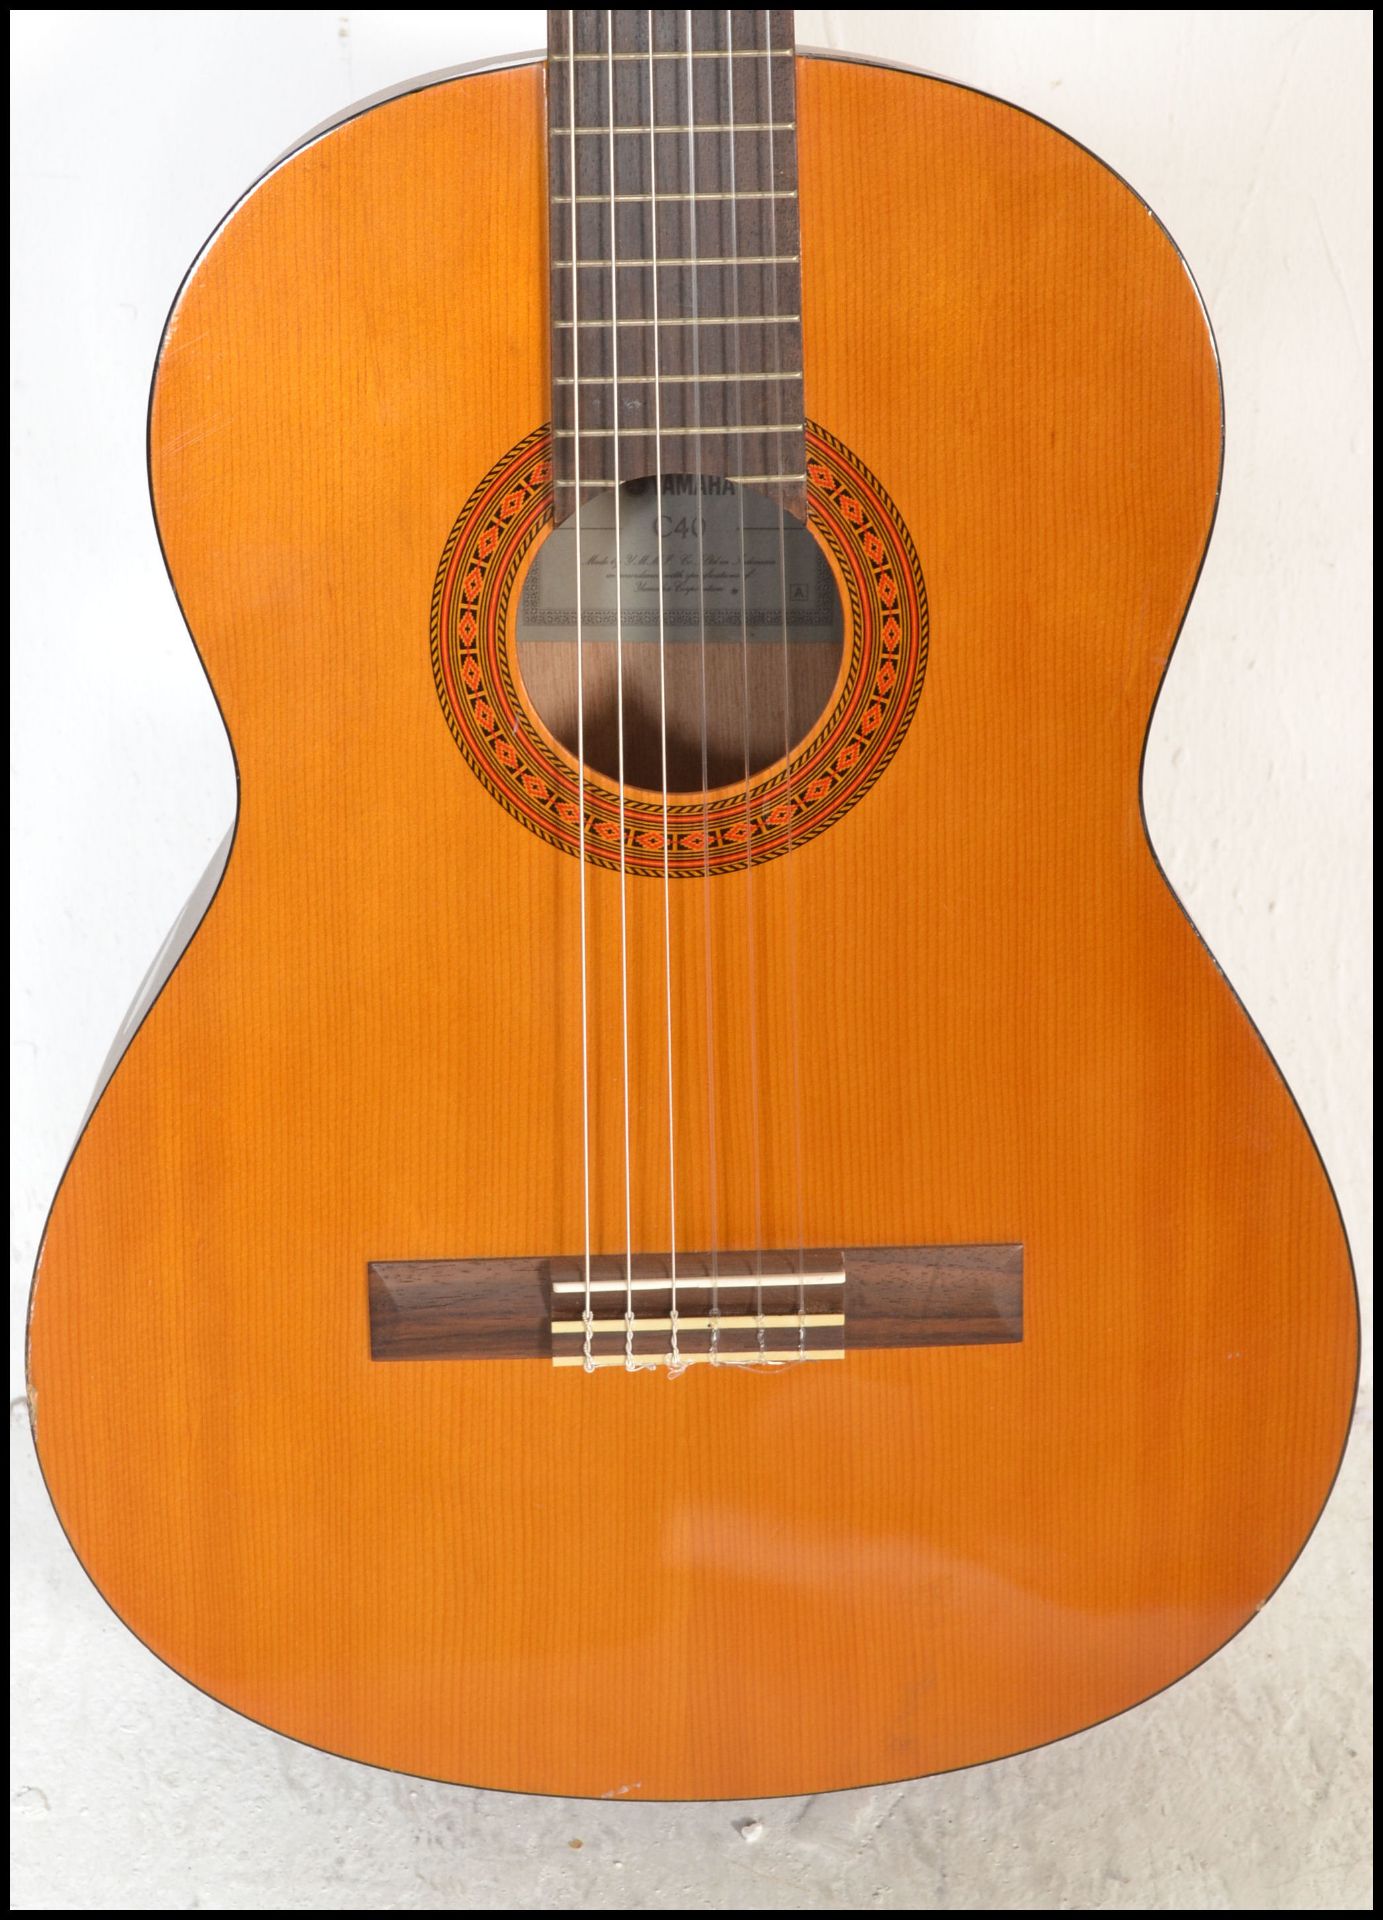 A Yamaha C40 six string acoustic guitar having a shaped hollow body with white tuning pegs and paper - Bild 2 aus 4